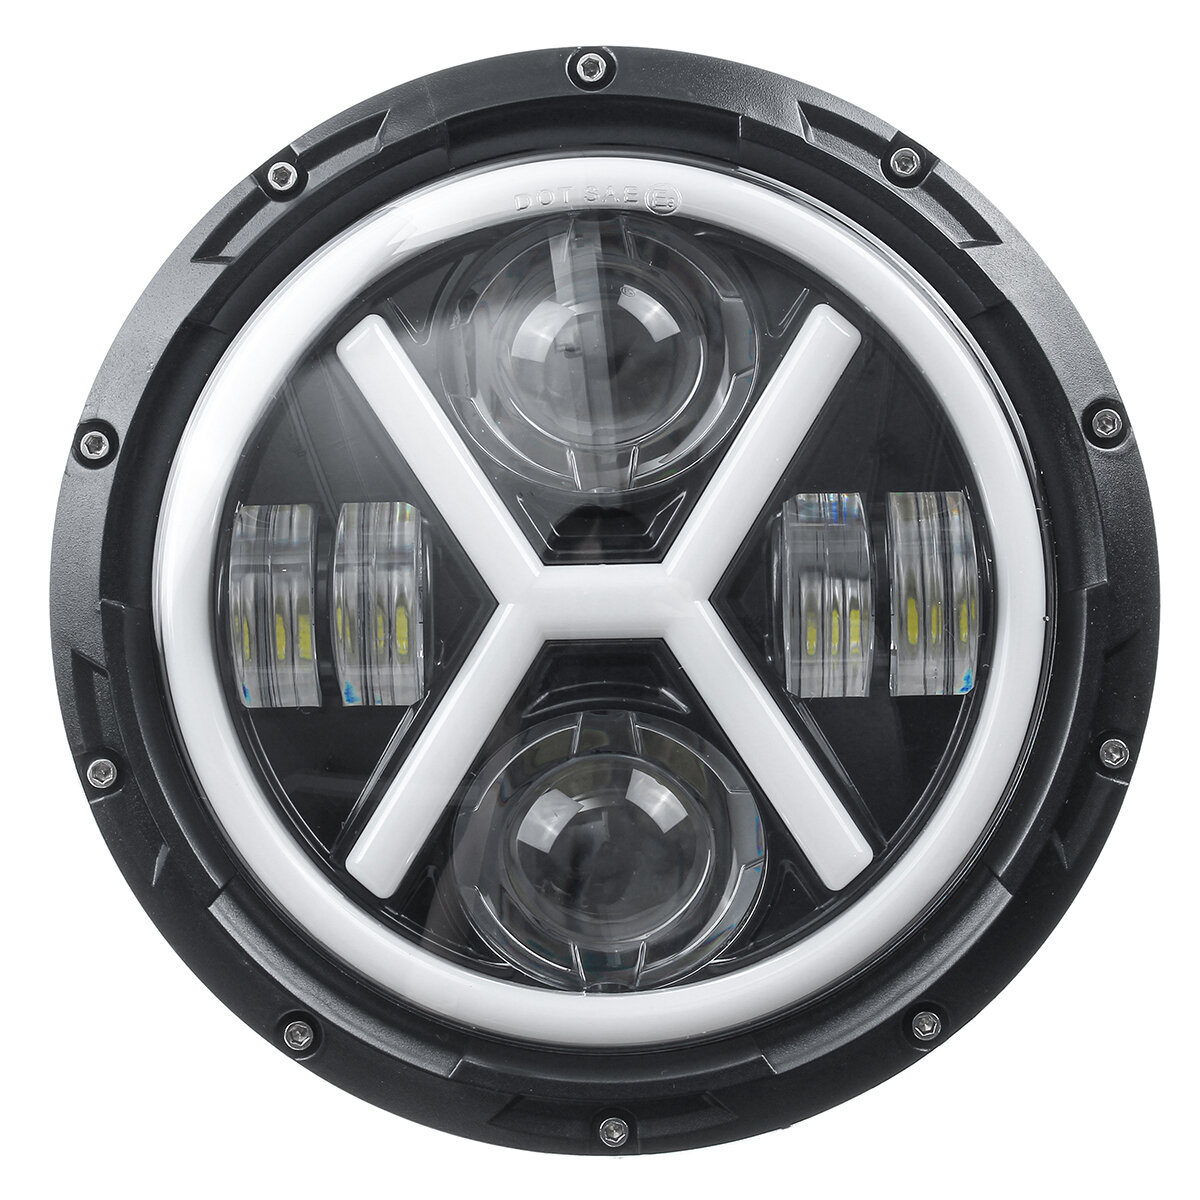 Image of 7"inch Waterproof Motorcycle Headlight Round LED Projector